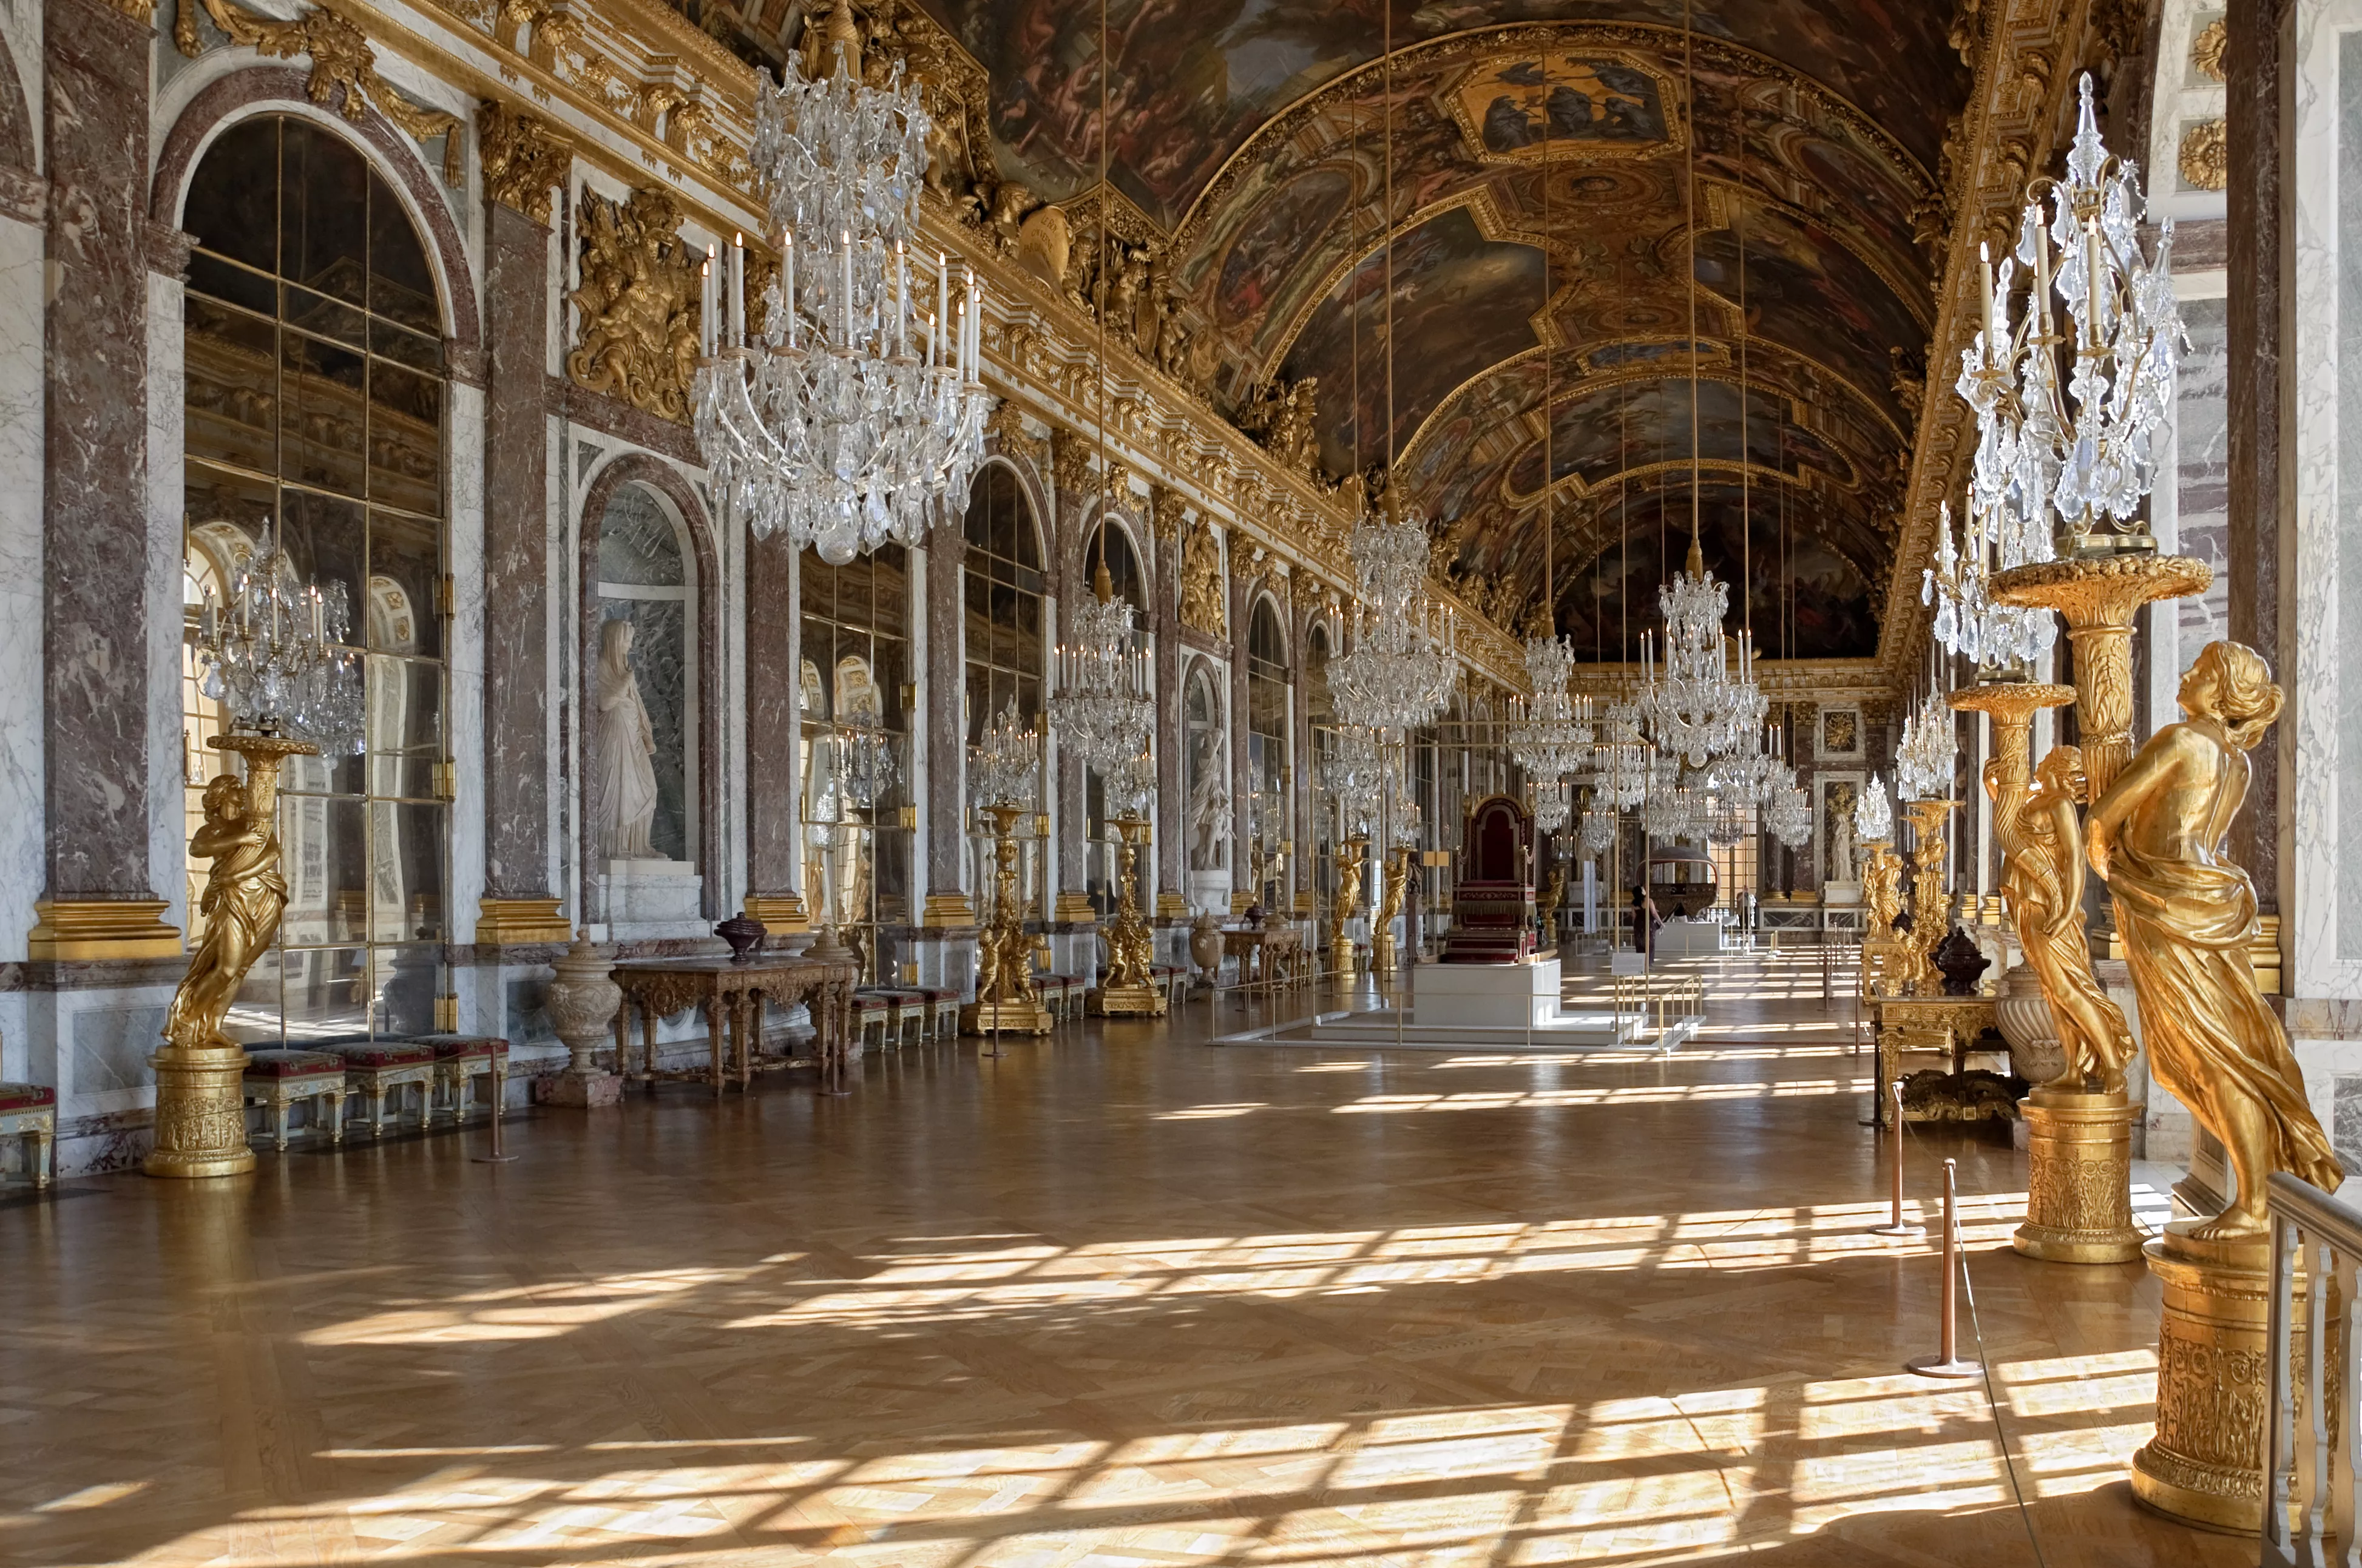 Mirror Gallery in France, Europe | Art Galleries - Rated 3.7